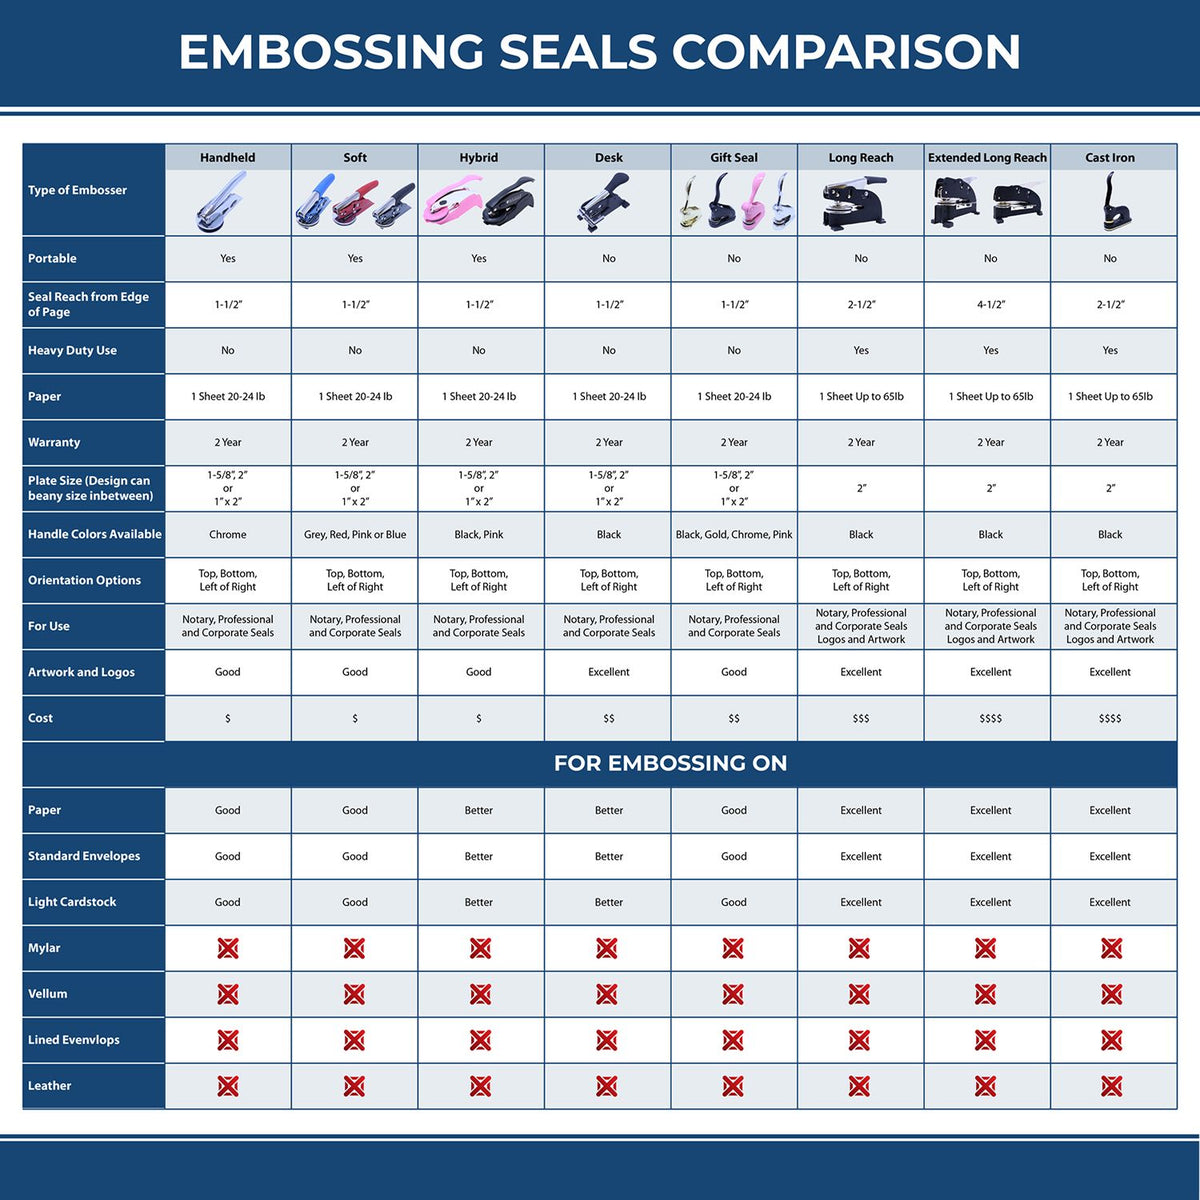 A comparison chart for the different types of mount models available for the Heavy Duty Cast Iron Utah Engineer Seal Embosser.